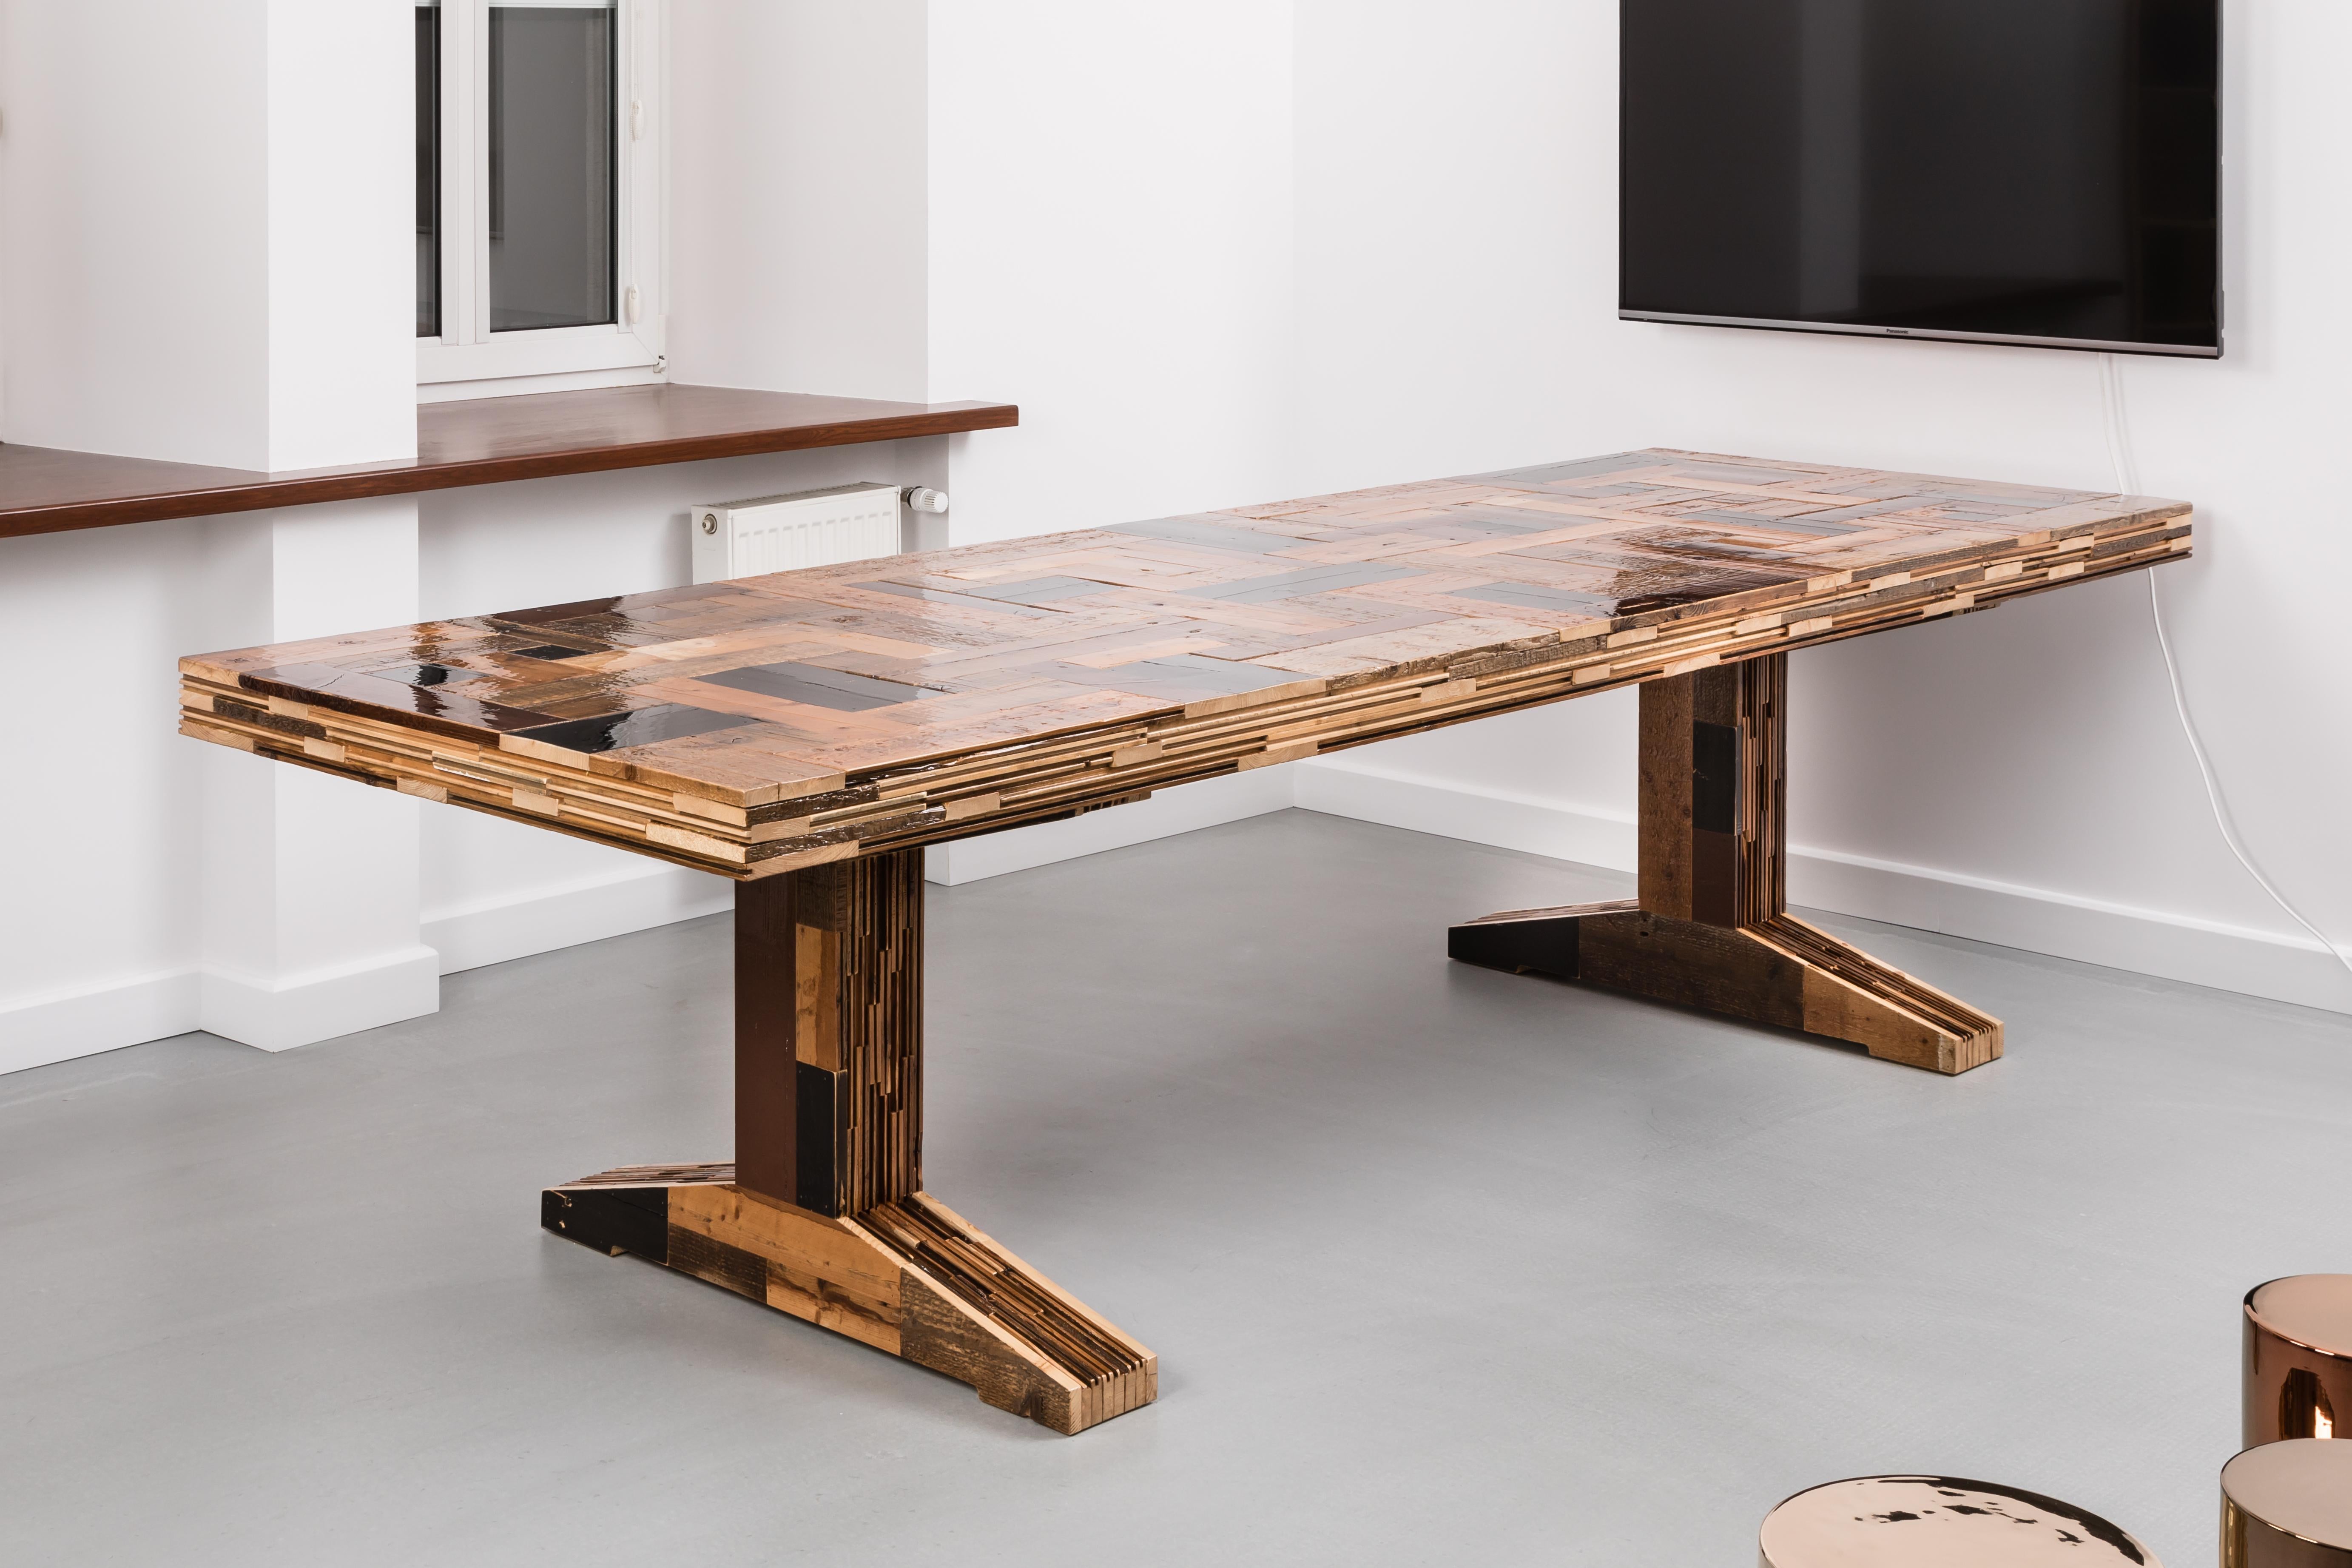 Contemporary wooden dining table, Waste table in scrapwood by Piet Hein Eek

The Waste Table in Scrapwood is meticulously crafted in Piet Hein Eek's studio using traditional woodworking technique. It brings his quintessential vocabulary of